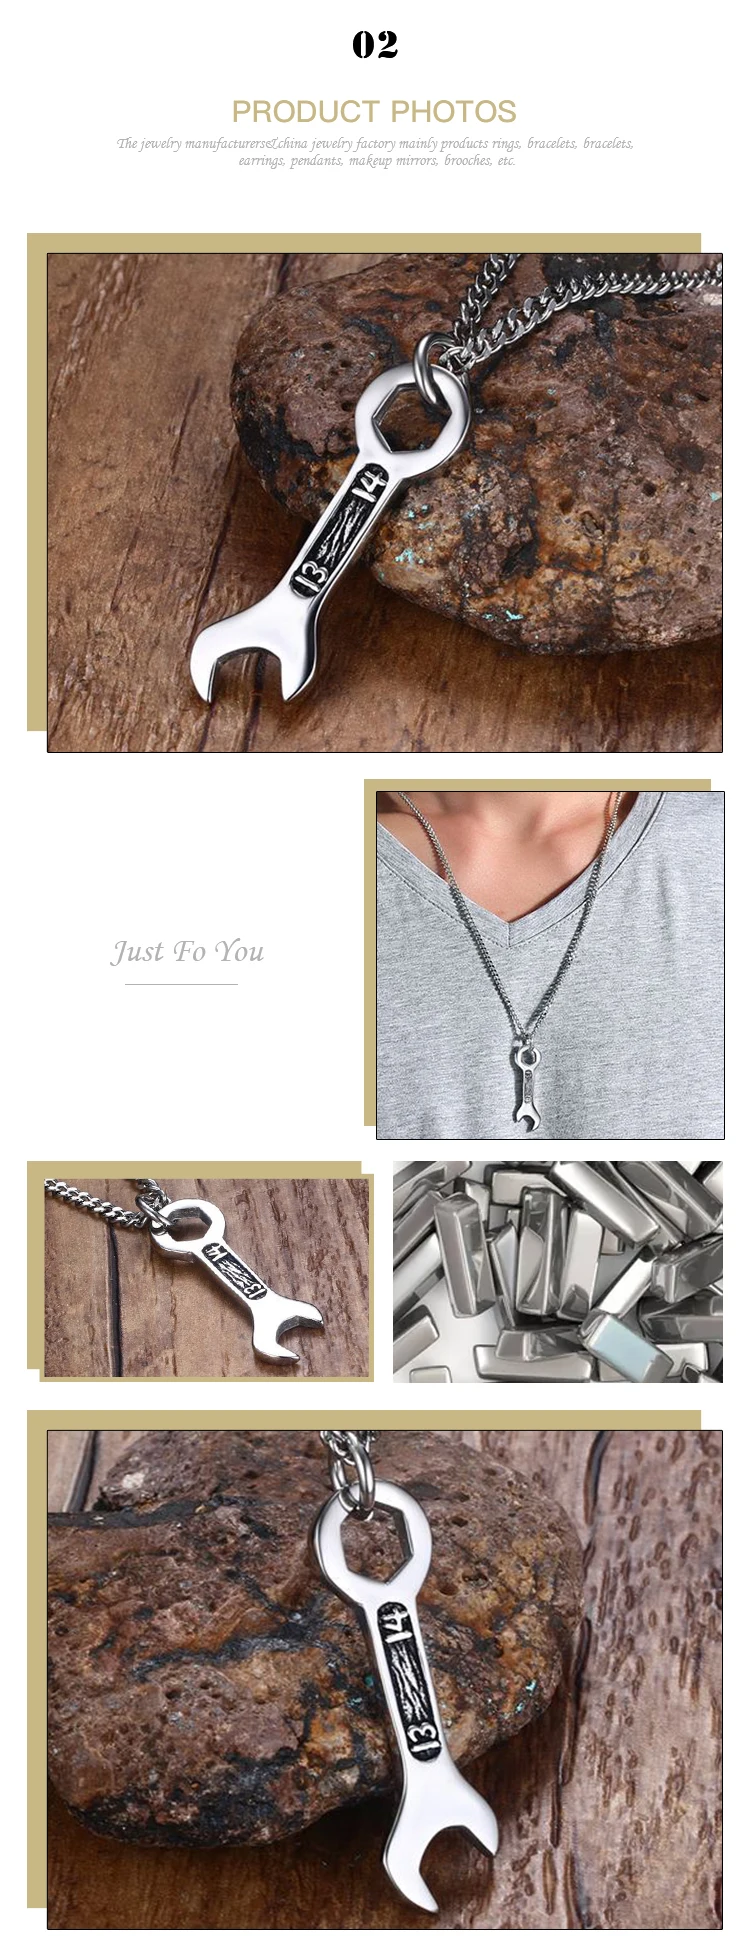 Foshan Keke Jewelry 40MM stainless steel wrench pendant steel color men's necklace PN-784S